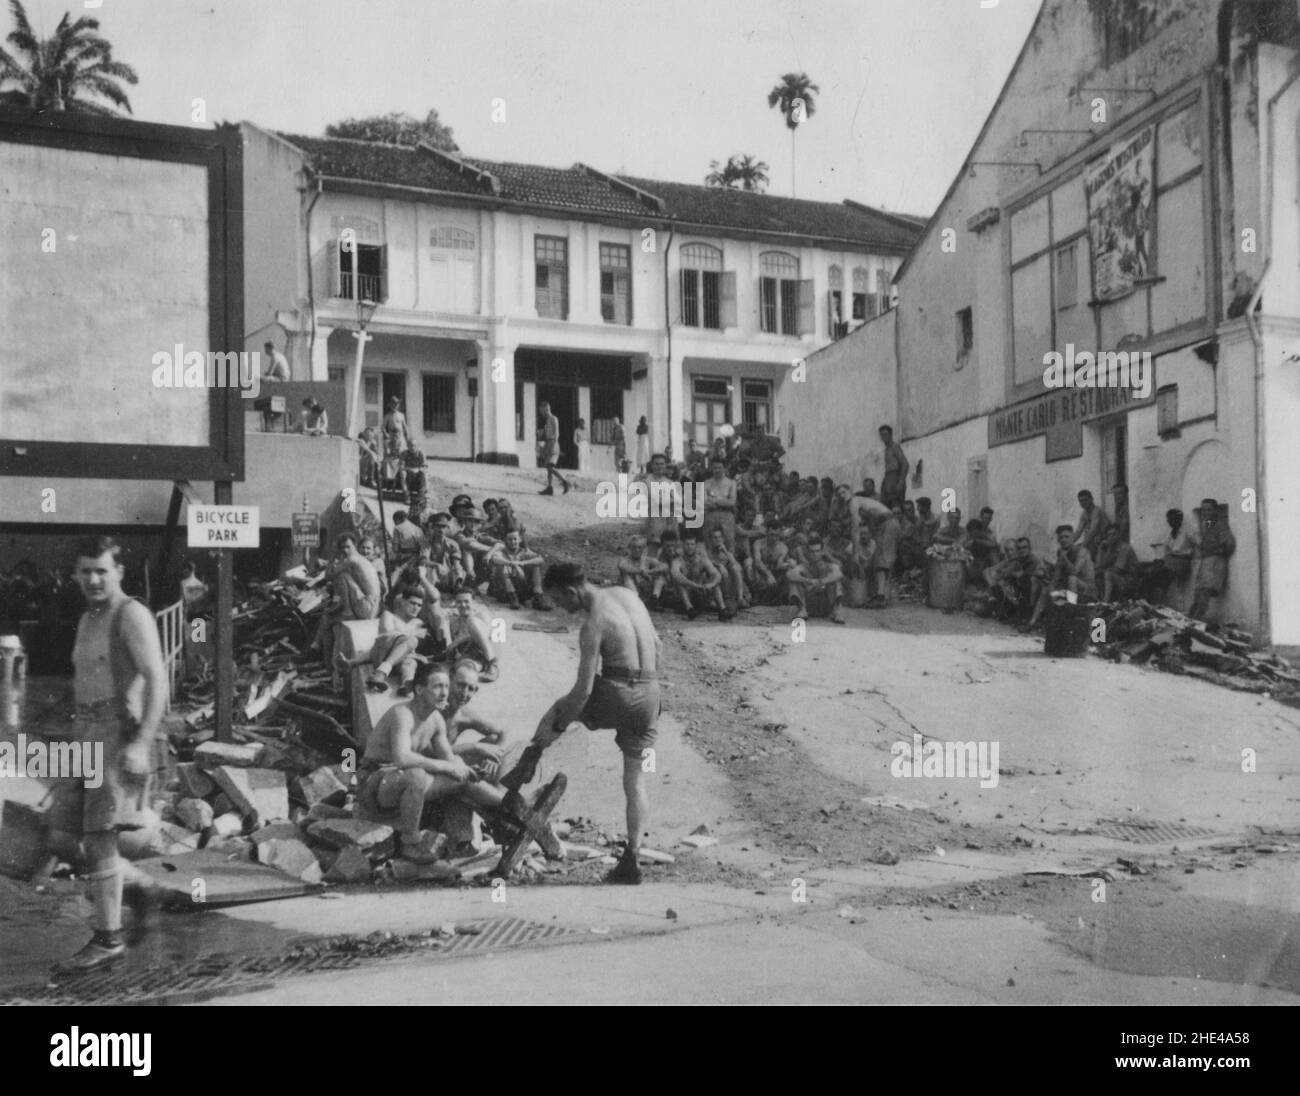 Malayan Campaign, 1941-1942. Surrendered British troops in Singapore taken as prisoners of war by the invading Imperial Japanese Army, circa February 1942. Stock Photo